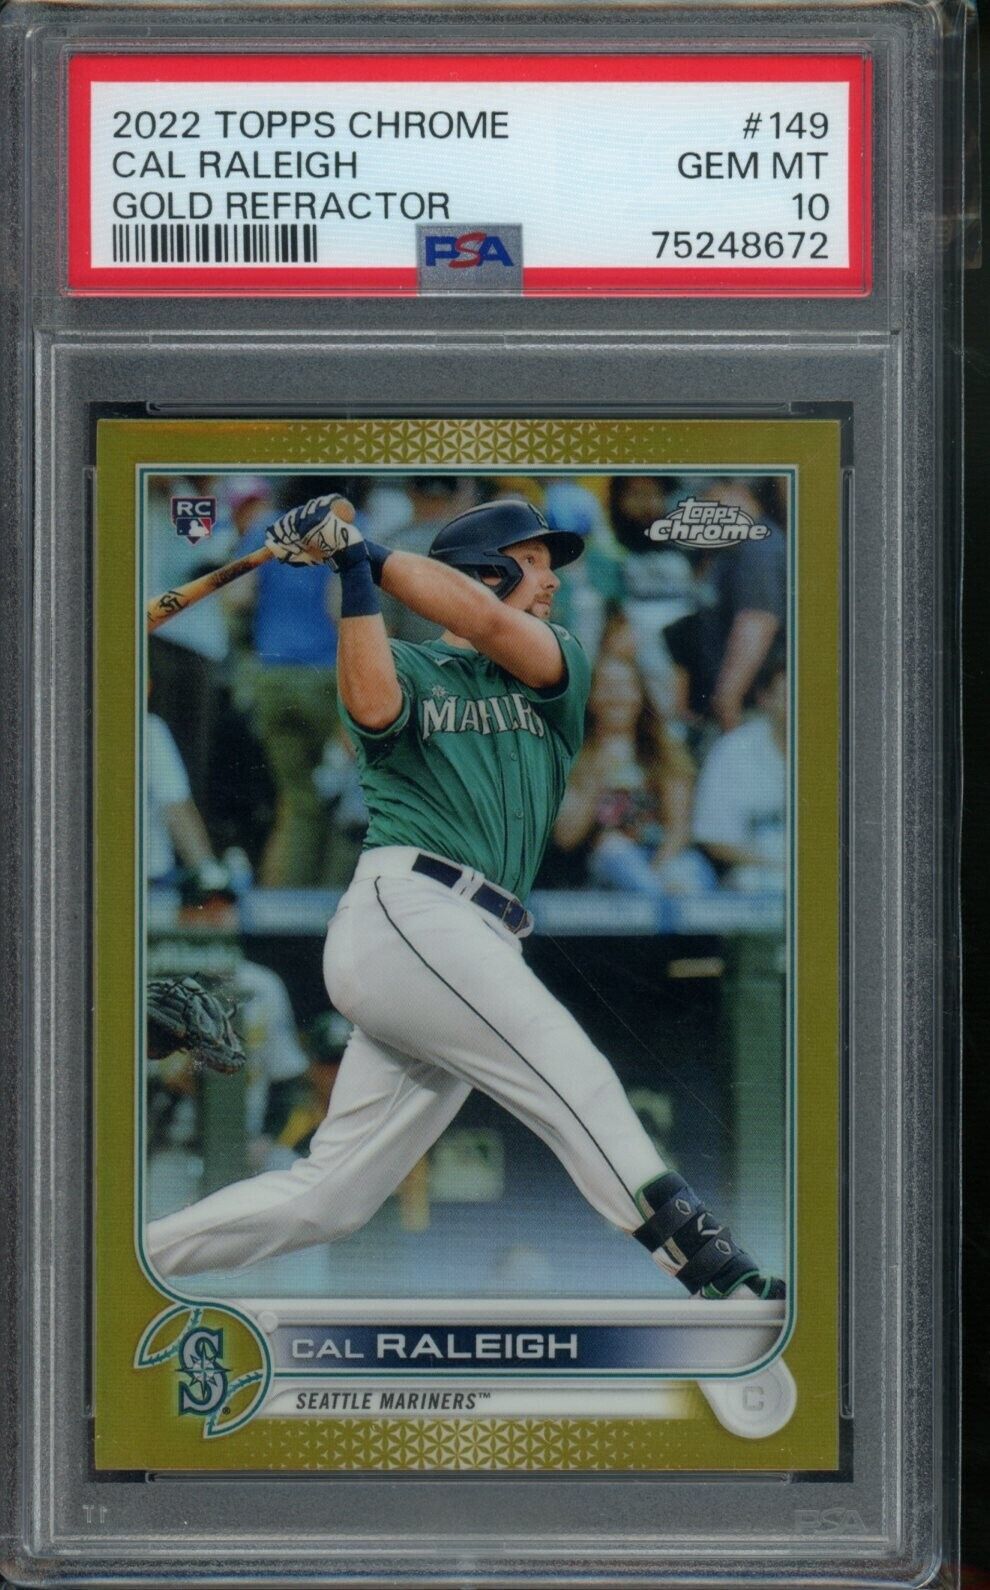 CAL RALEIGH 2022 TOPPS CHROME #149 MARINERS ROOKIE GOLD REFRACTOR #13/50 PSA 10